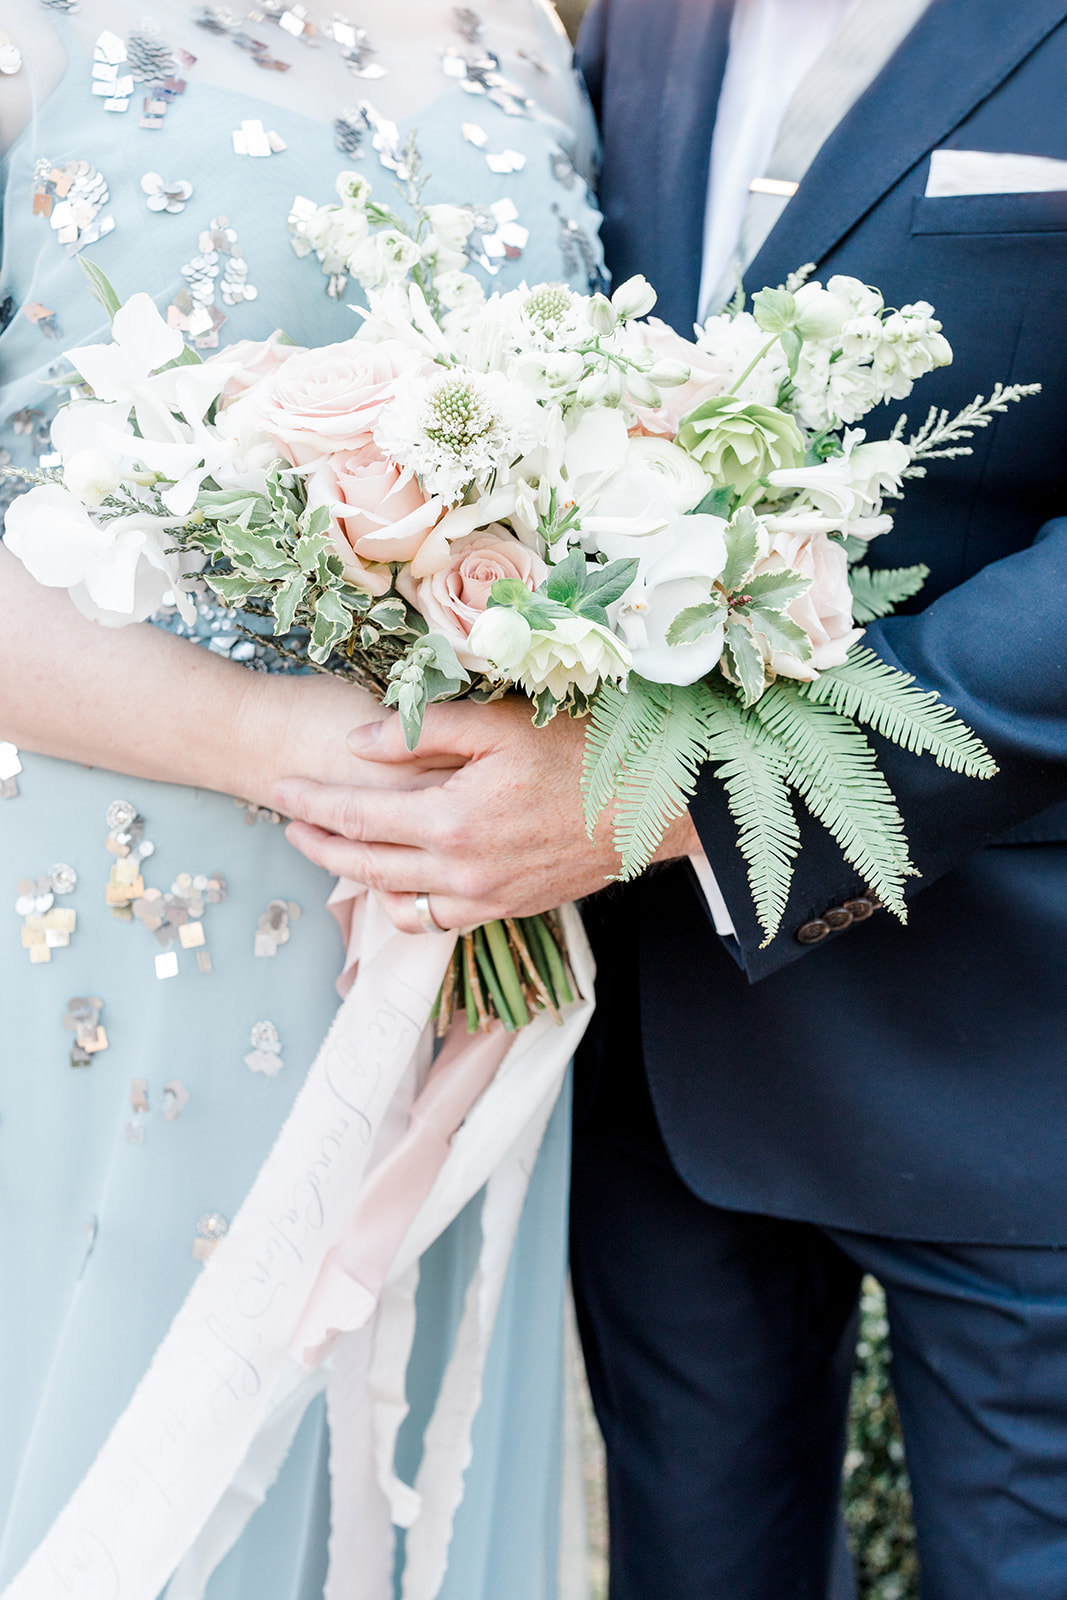 Wedding bouquet with blush roses - Kelsie Scully Photography